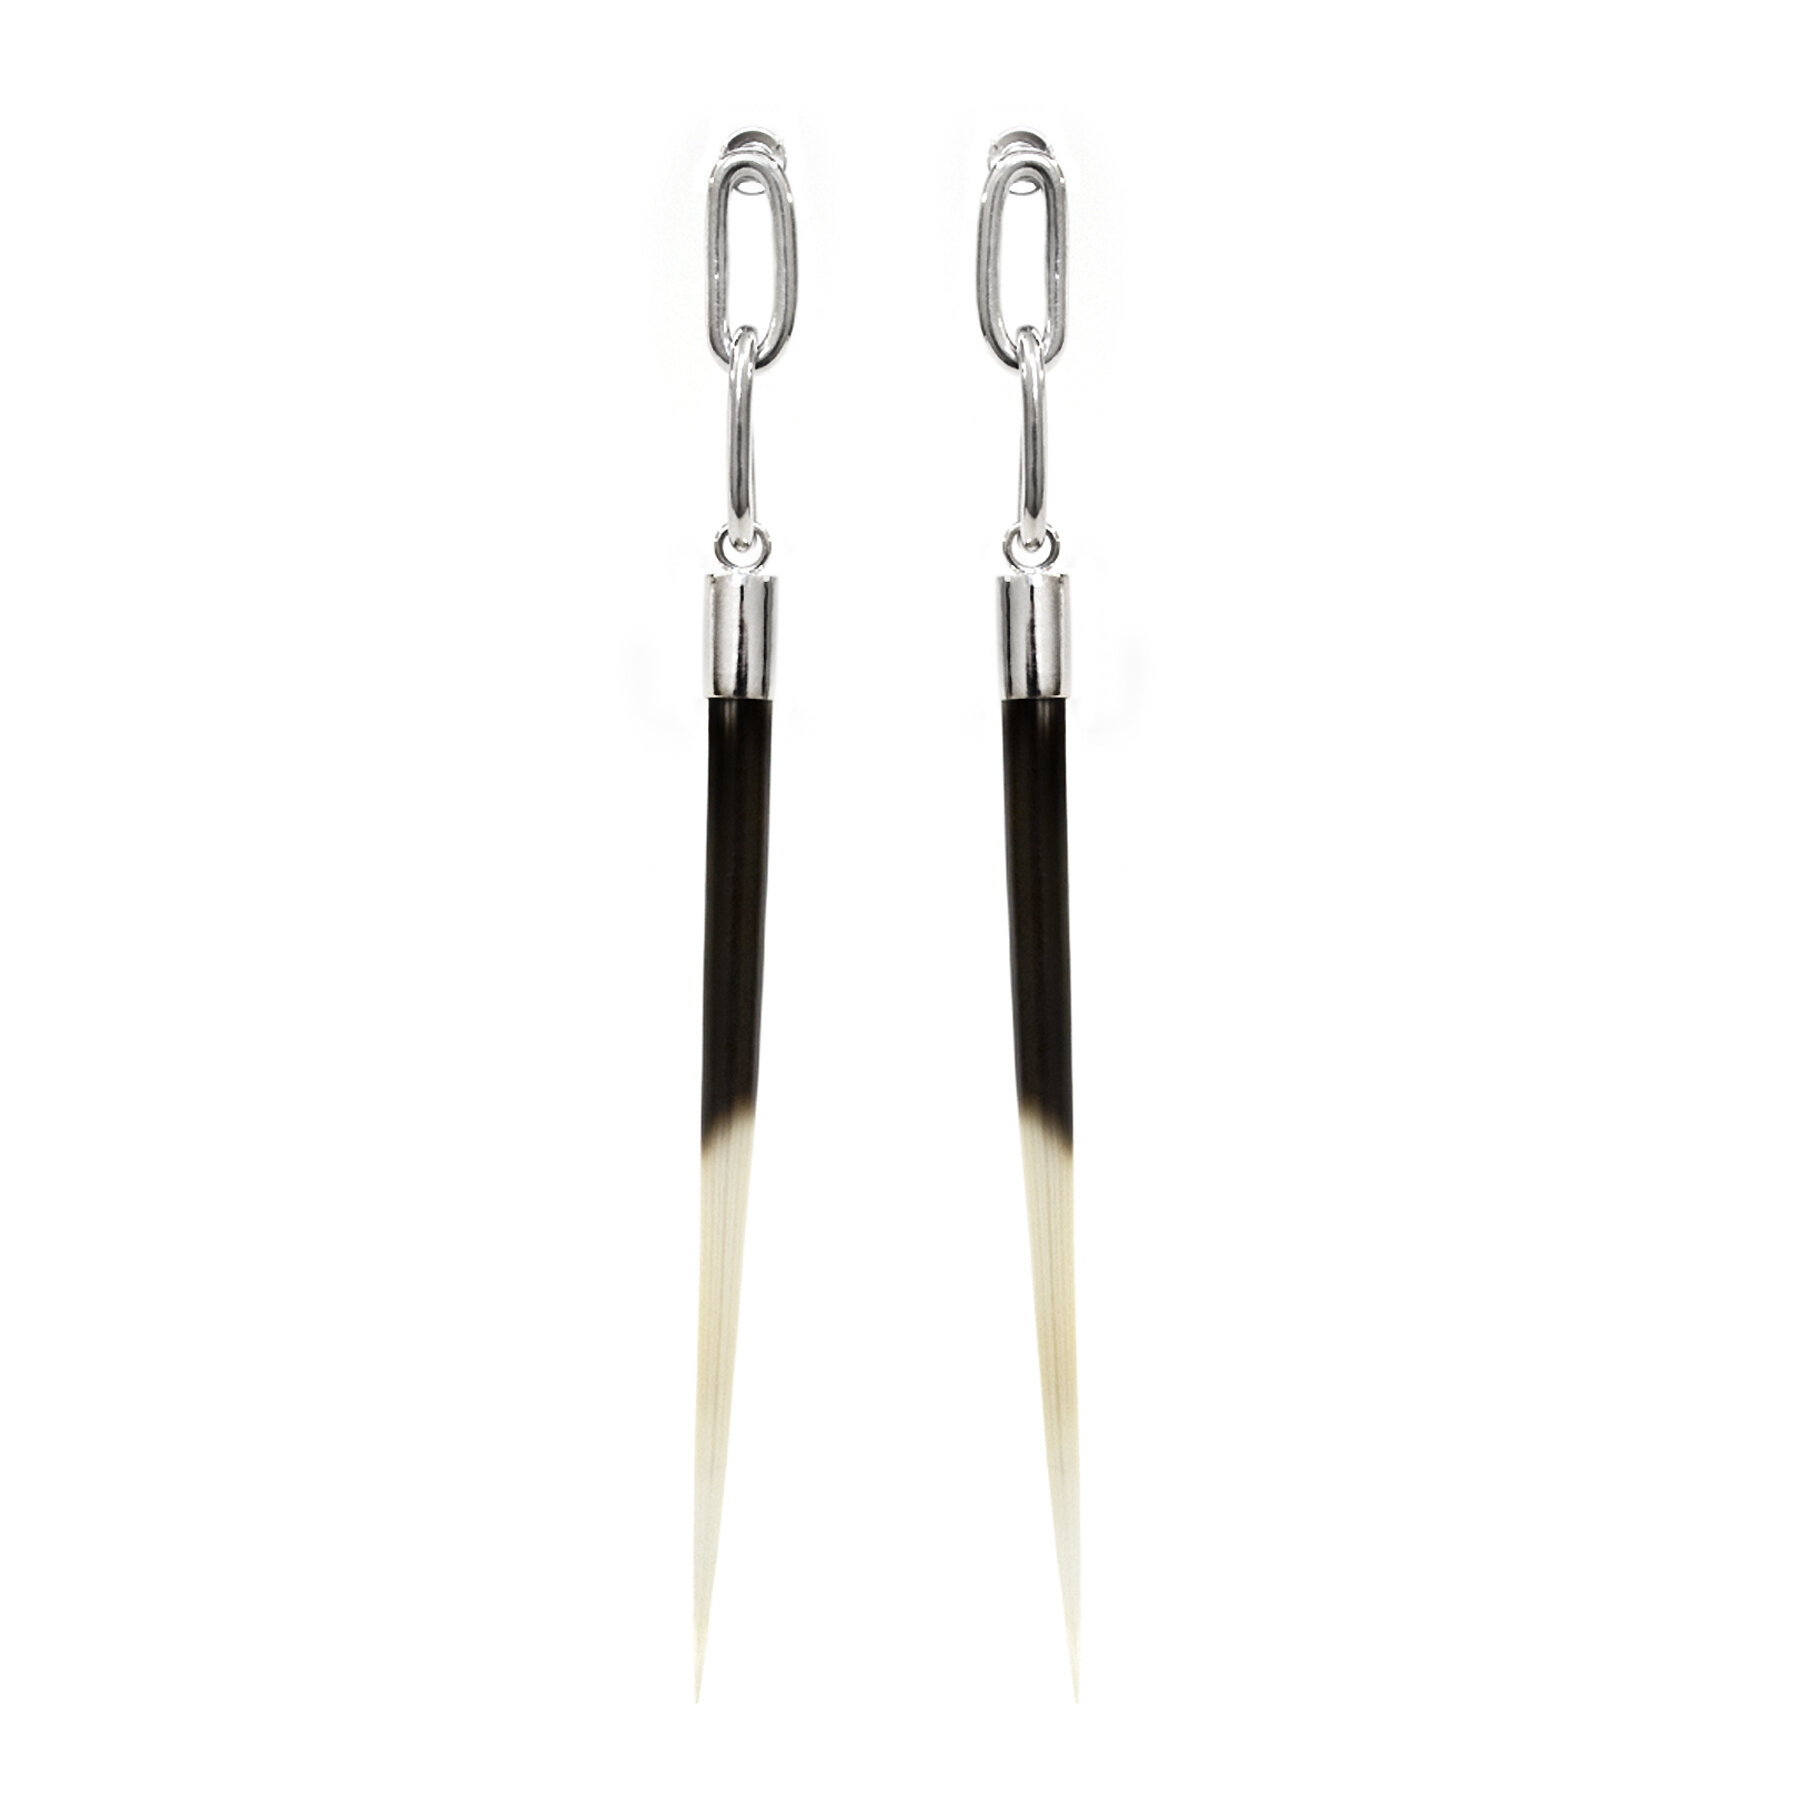 Porcupine quill & chain earrings_1.jpg